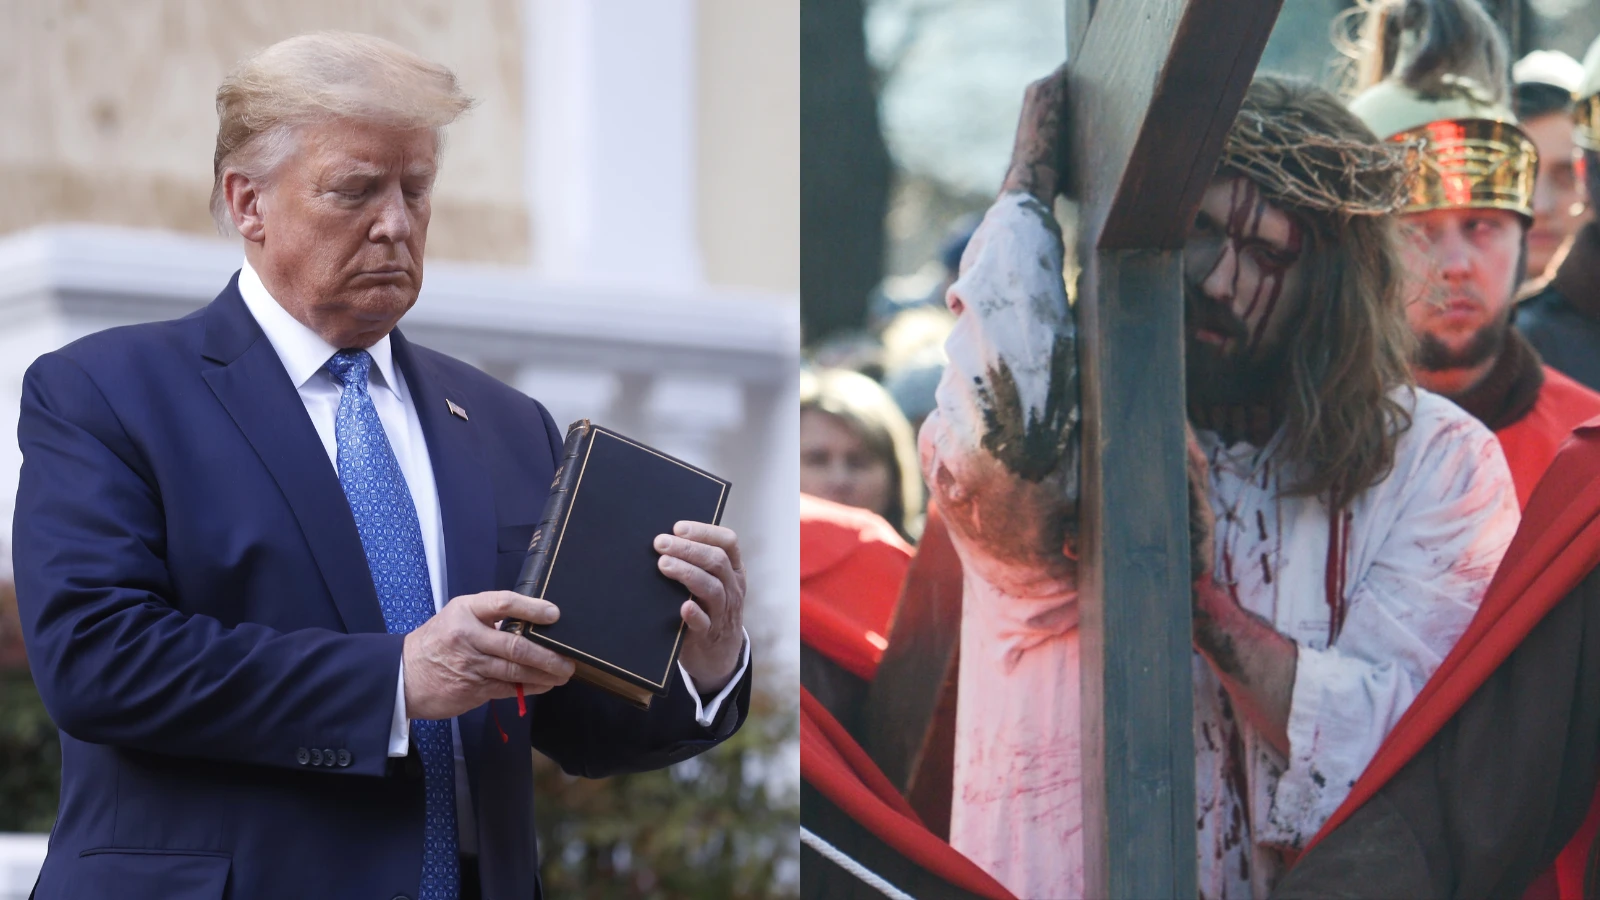 No, Trump isn’t Jesus Christ, but Democrats Sure are Persecuting Him like Jesus. Here’s Why.